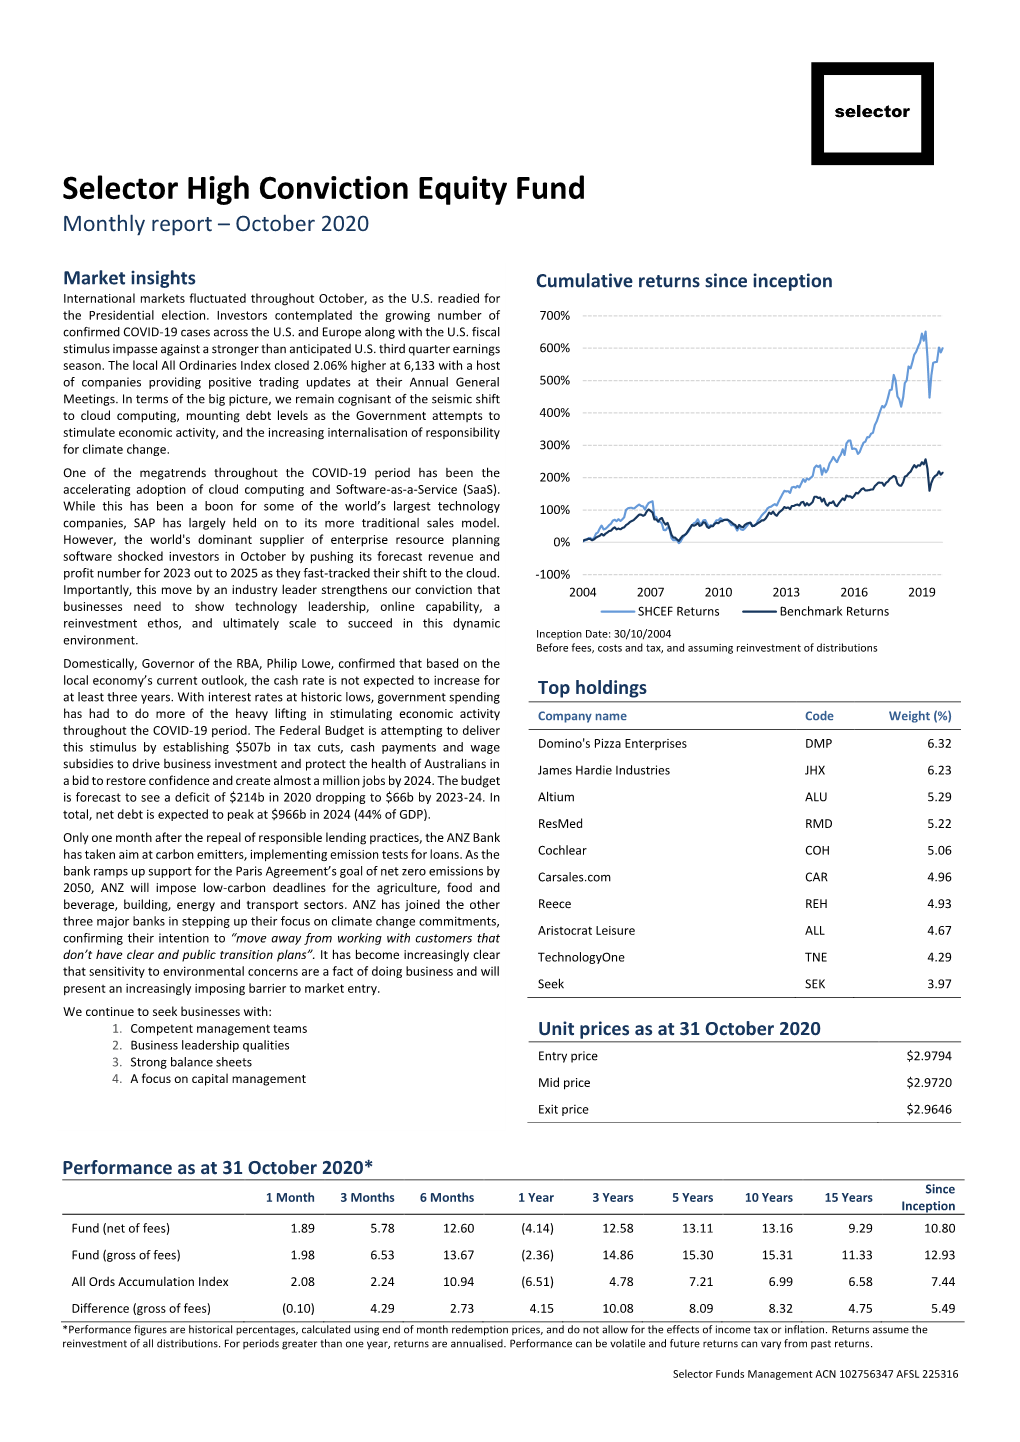 Selector High Conviction Equity Fund Monthly Report – October 2020